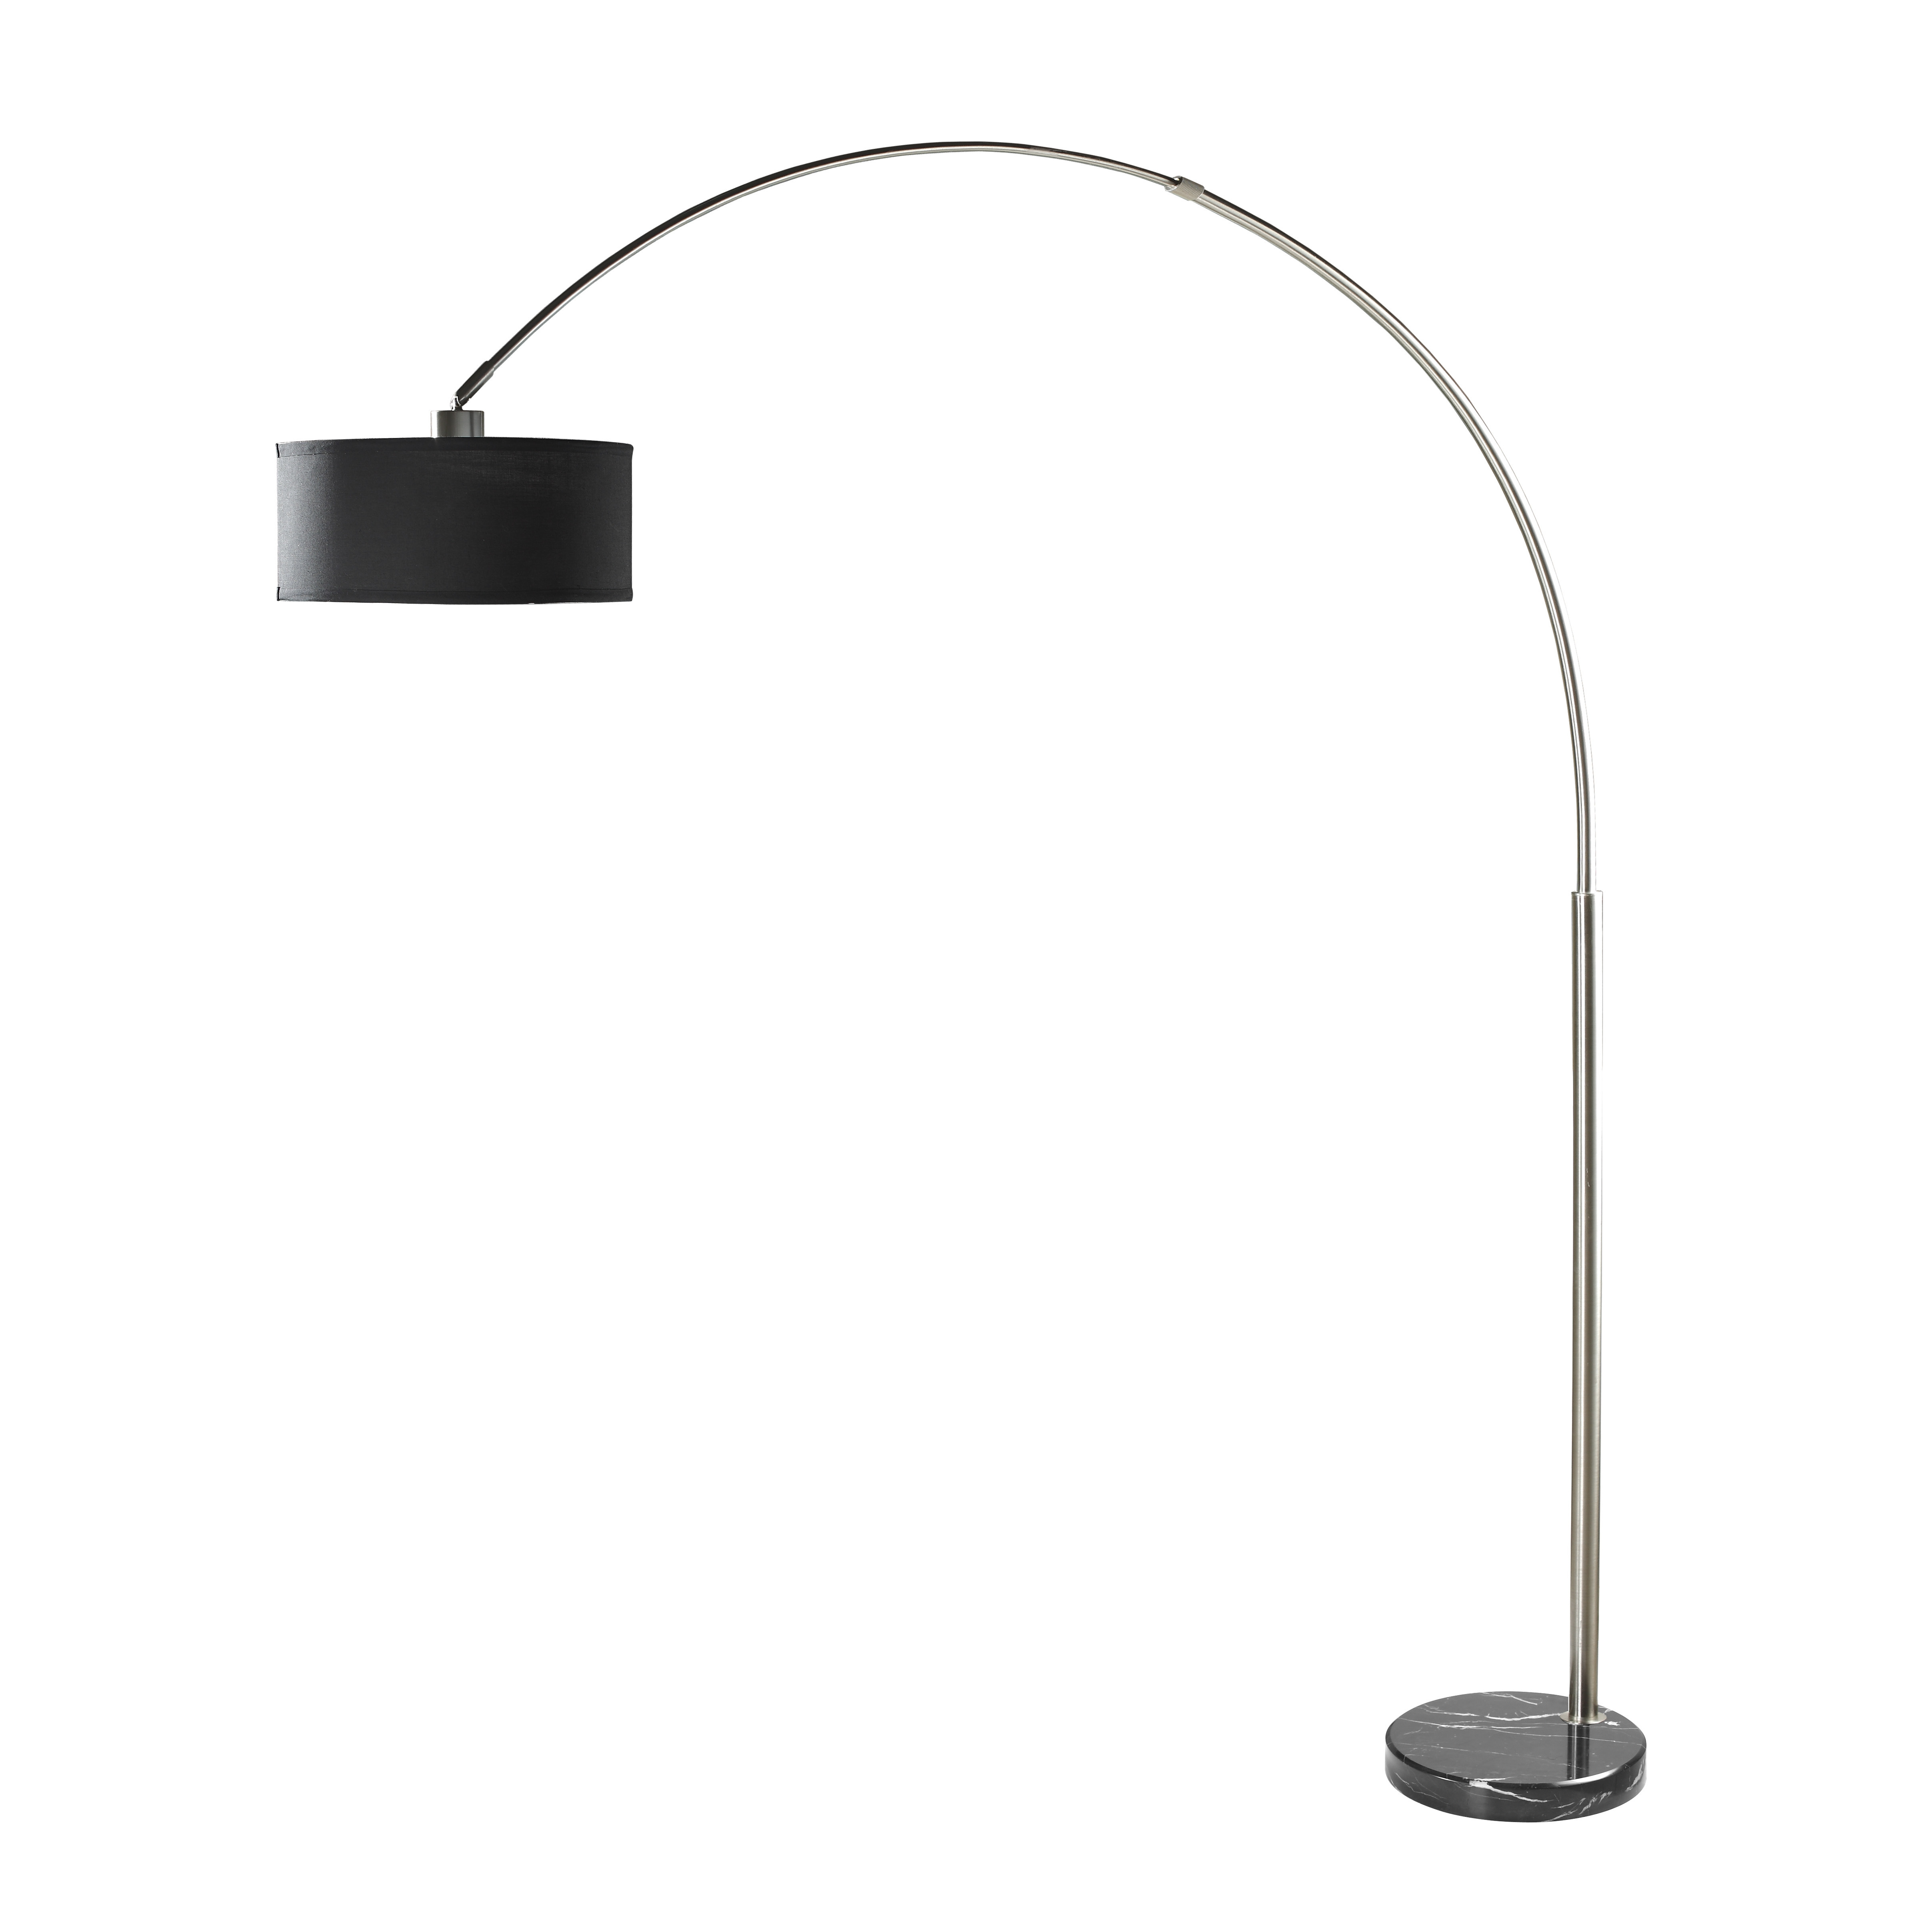 Flooring Arc Floor Lamp In Black Color Contemporary Arch in sizing 4830 X 4830